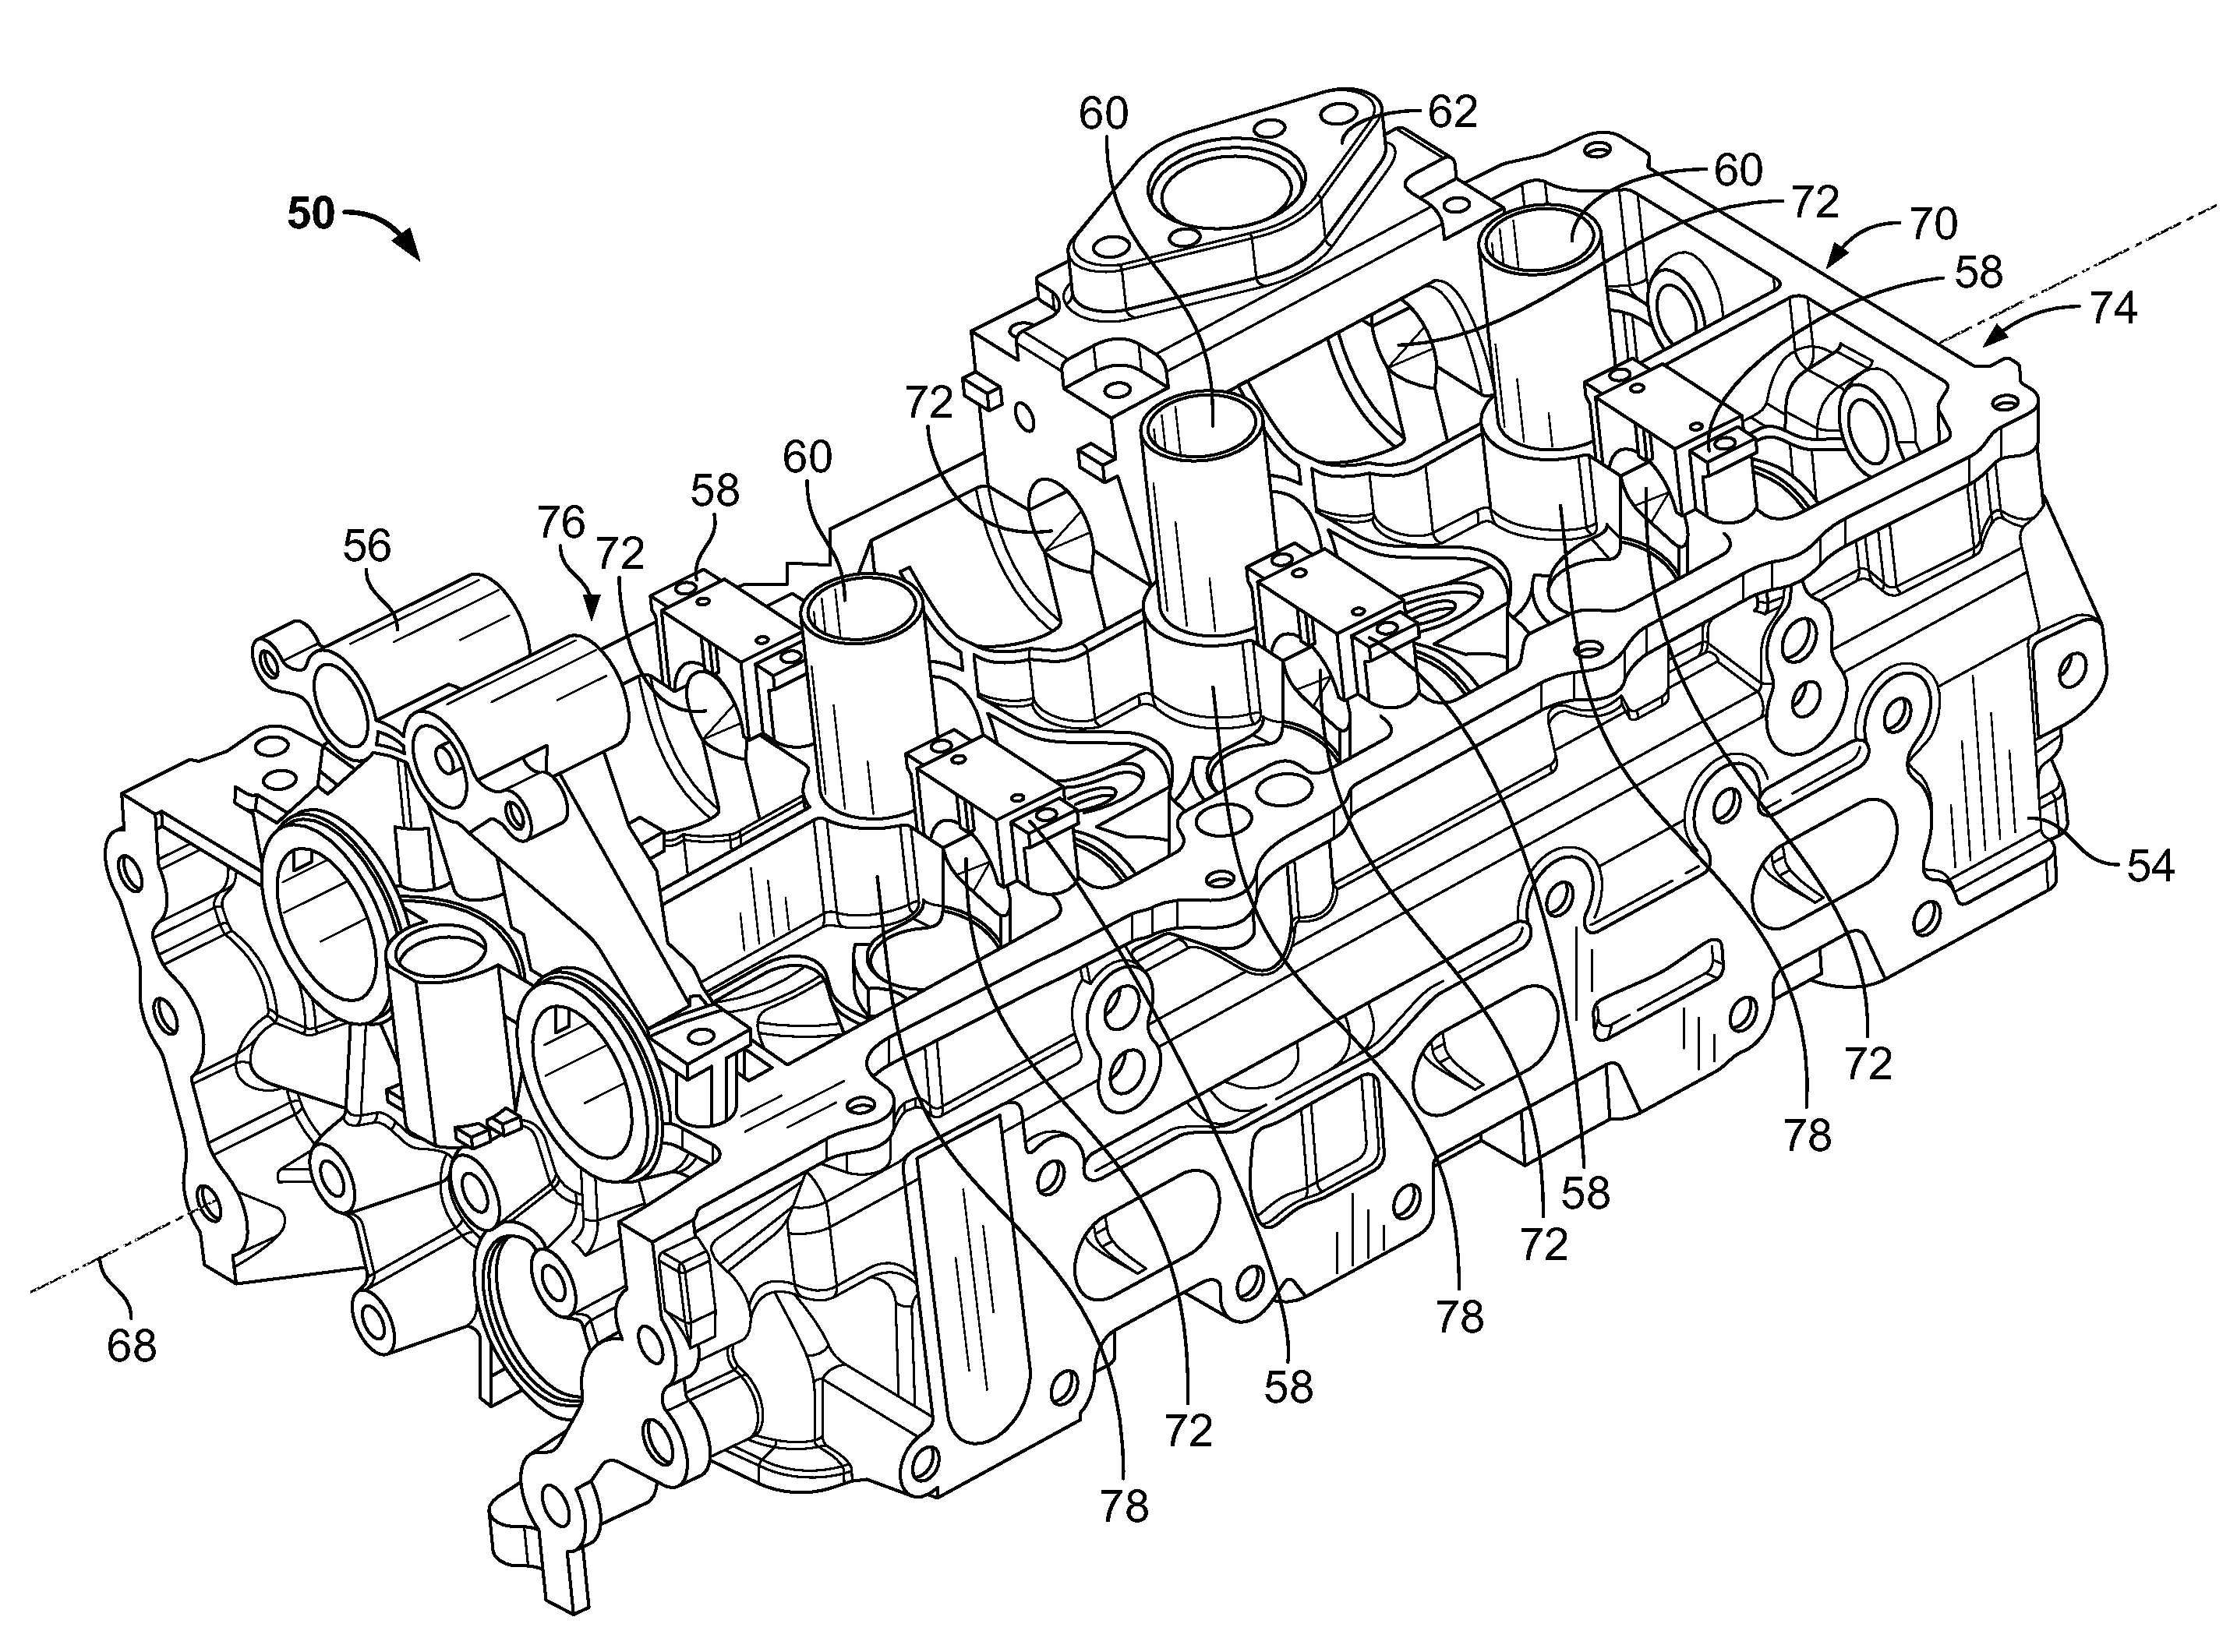 Upper cylinder head housing for use with an engine and method of making the same